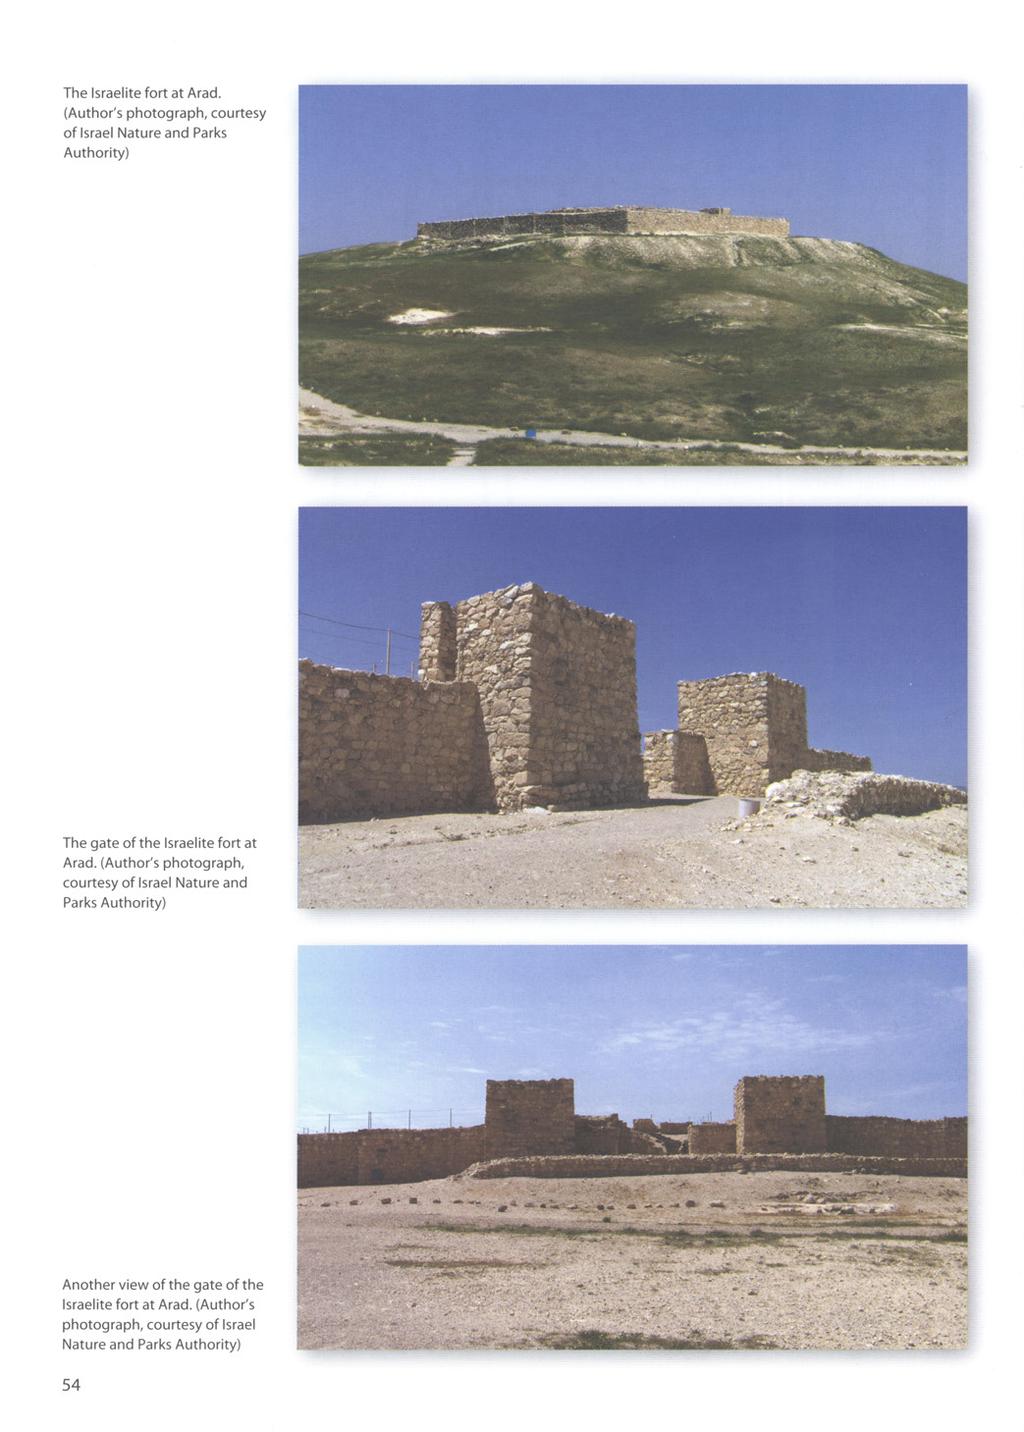 The Israelite fort at Arad. (Author's photograph, courtesy of Israel Nature and Parks Authority) The gate of the Israelite fort at Arad.